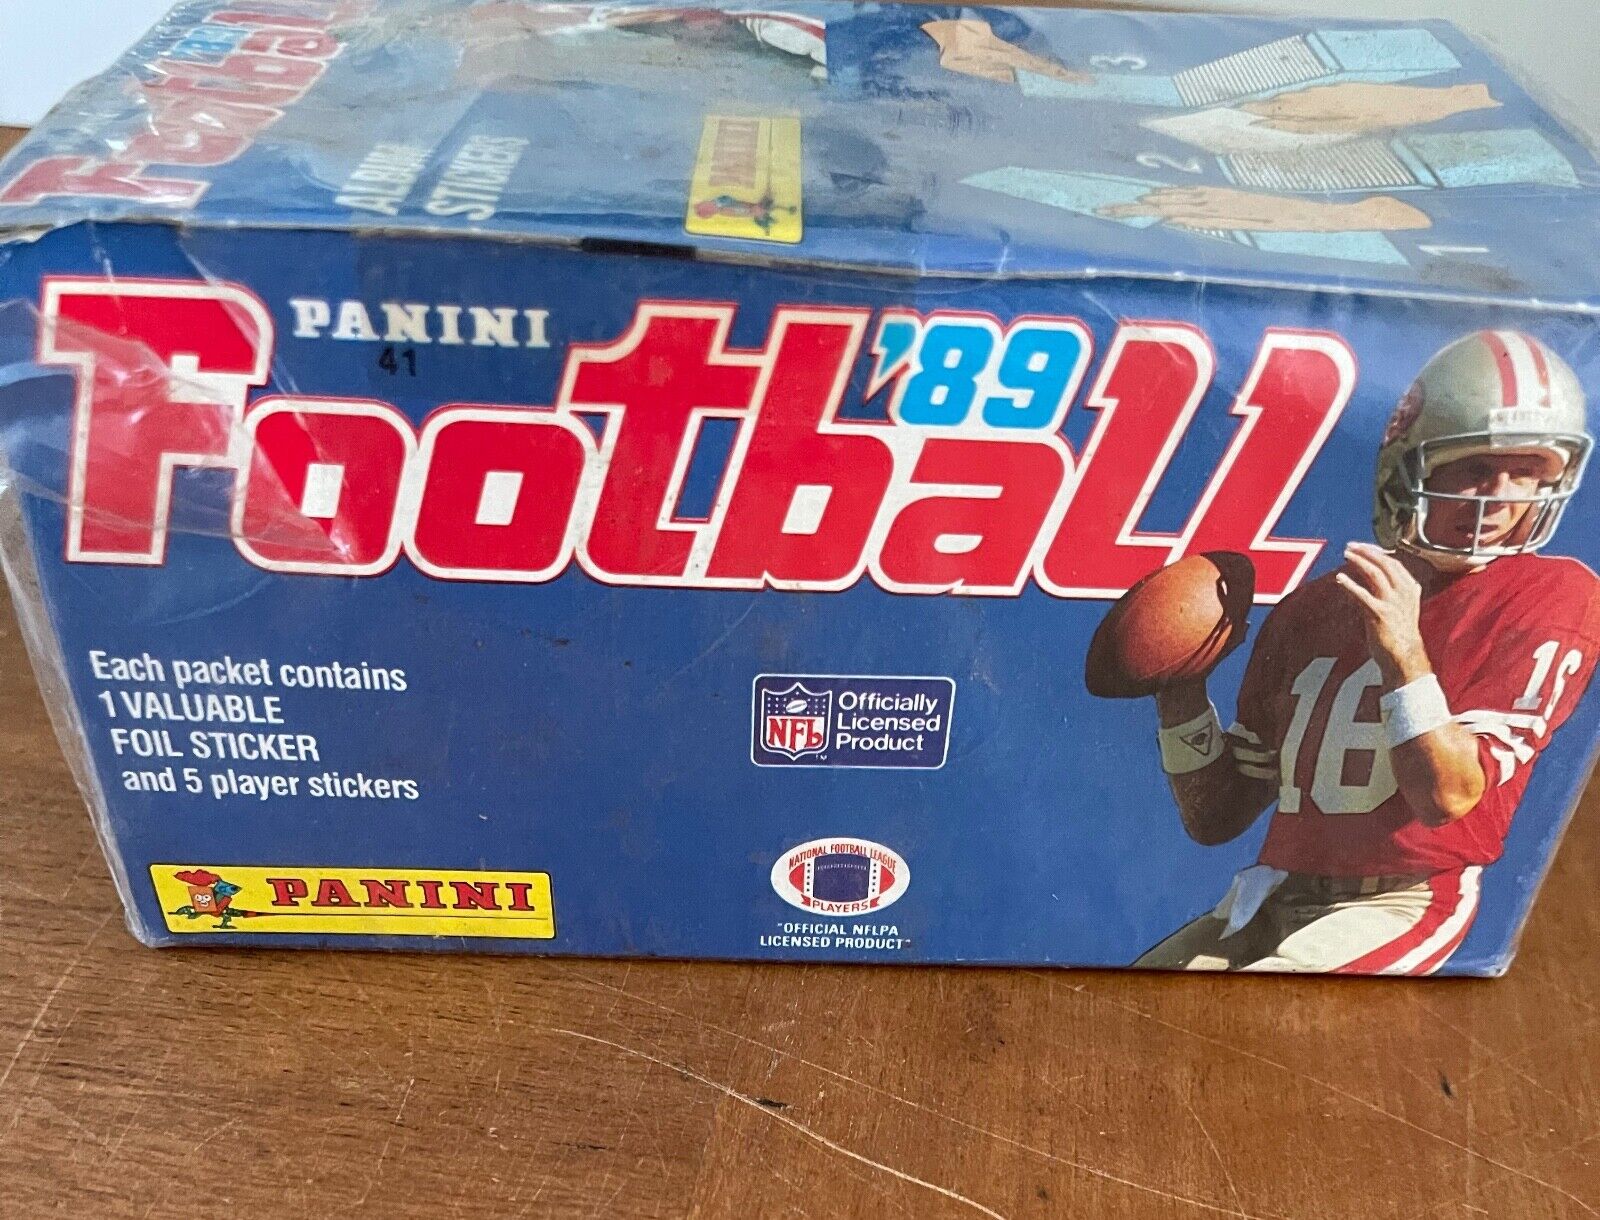 1989 Panini Football  - Unopened Sealed Box  - 100 packs - 1 Foil + 5 Stickers 